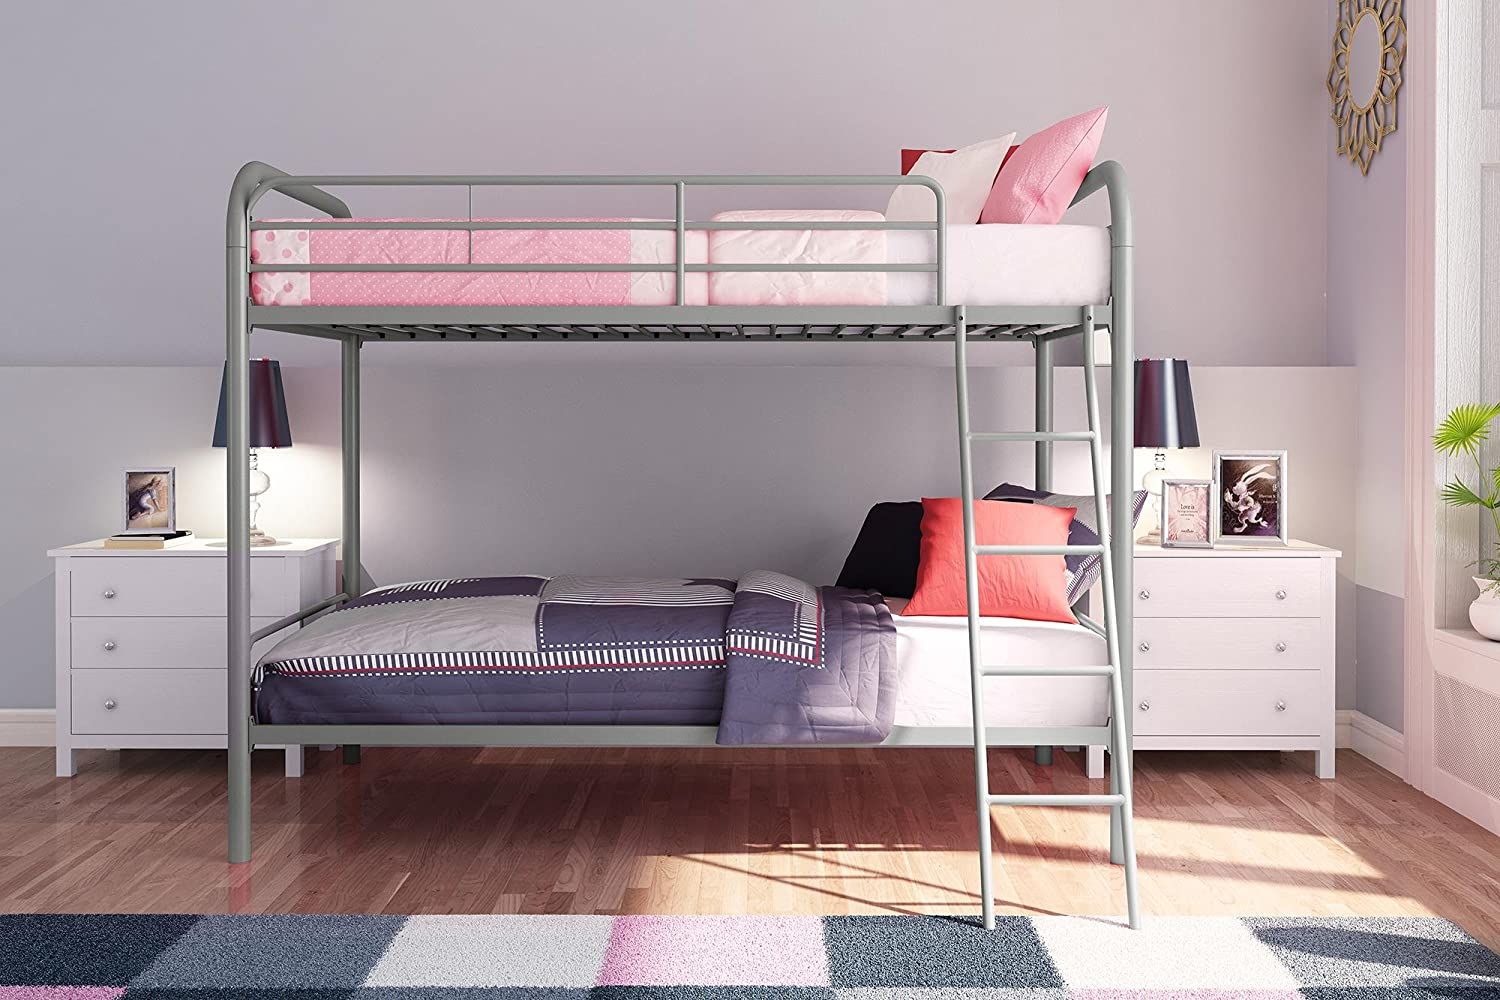 8 Best Bunk Beds 2020 The Strategist, Bunk Bed Safe For 4 Year Old